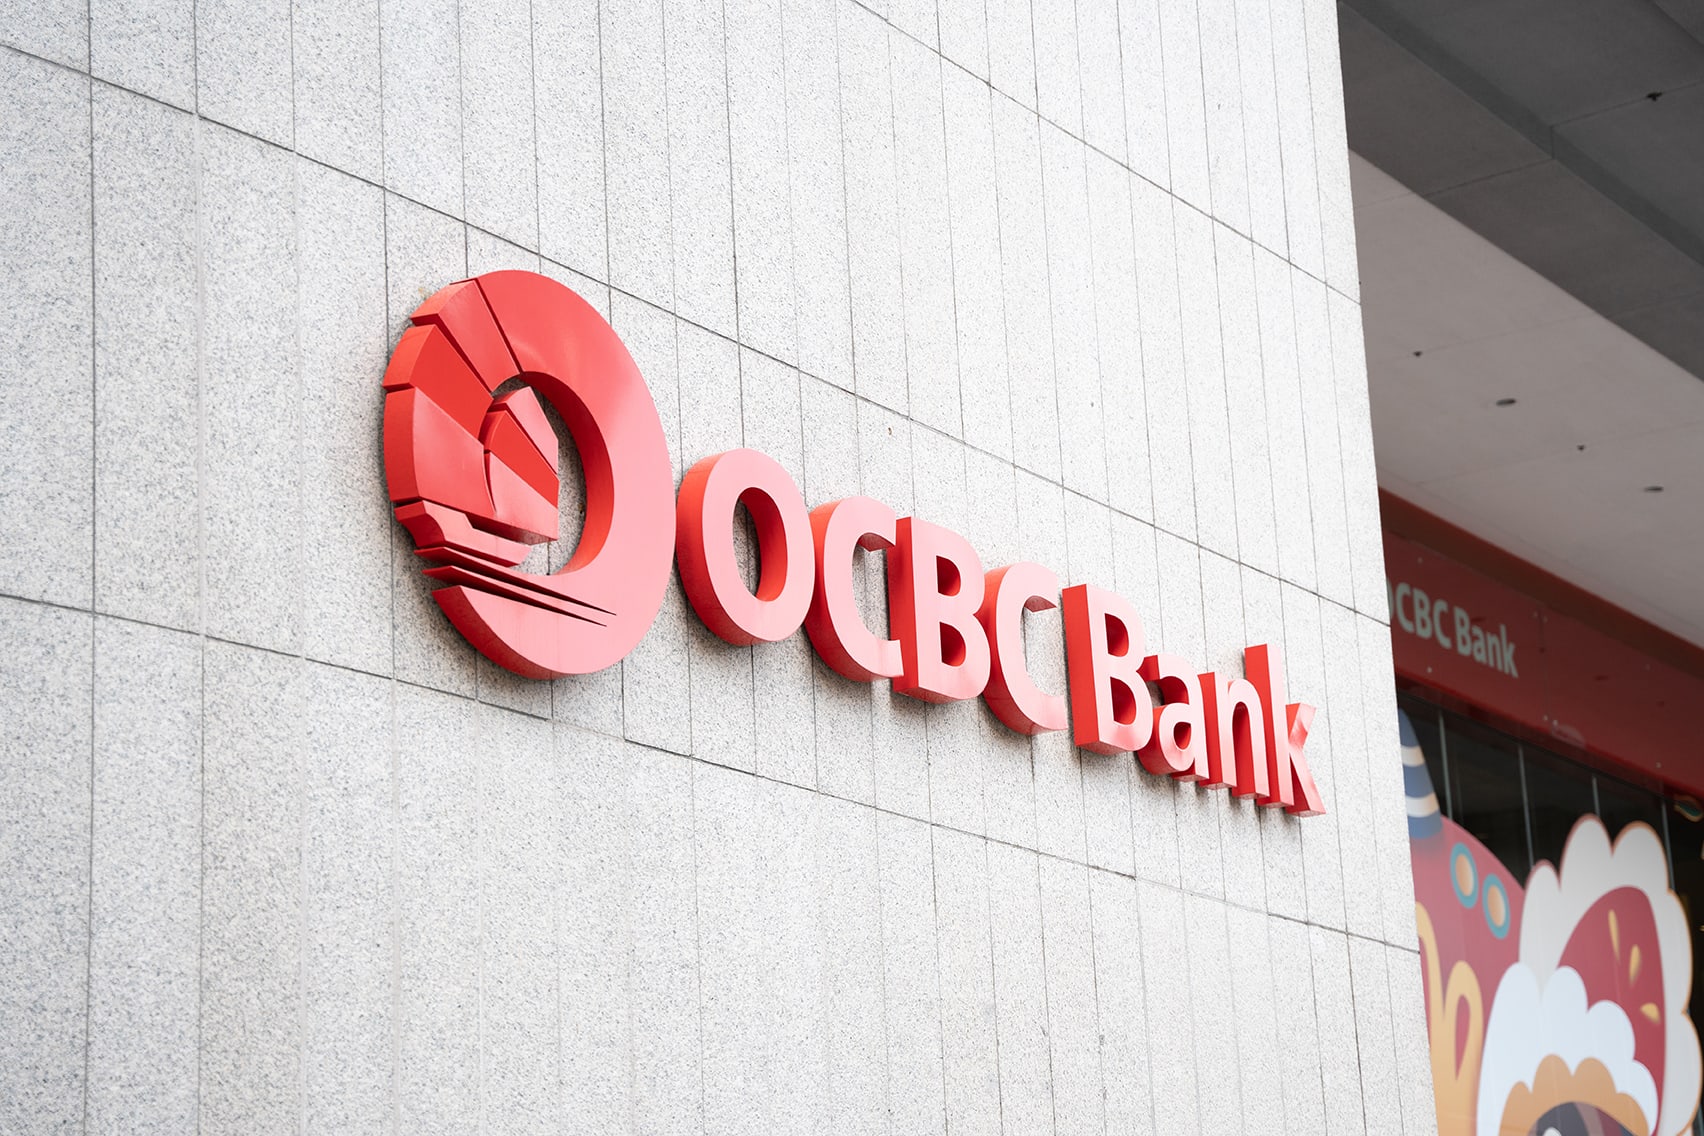 At least 469 bank customers of OCBC were affected by an SMS phishing scam, with losses totalling at least S$8.5 million.